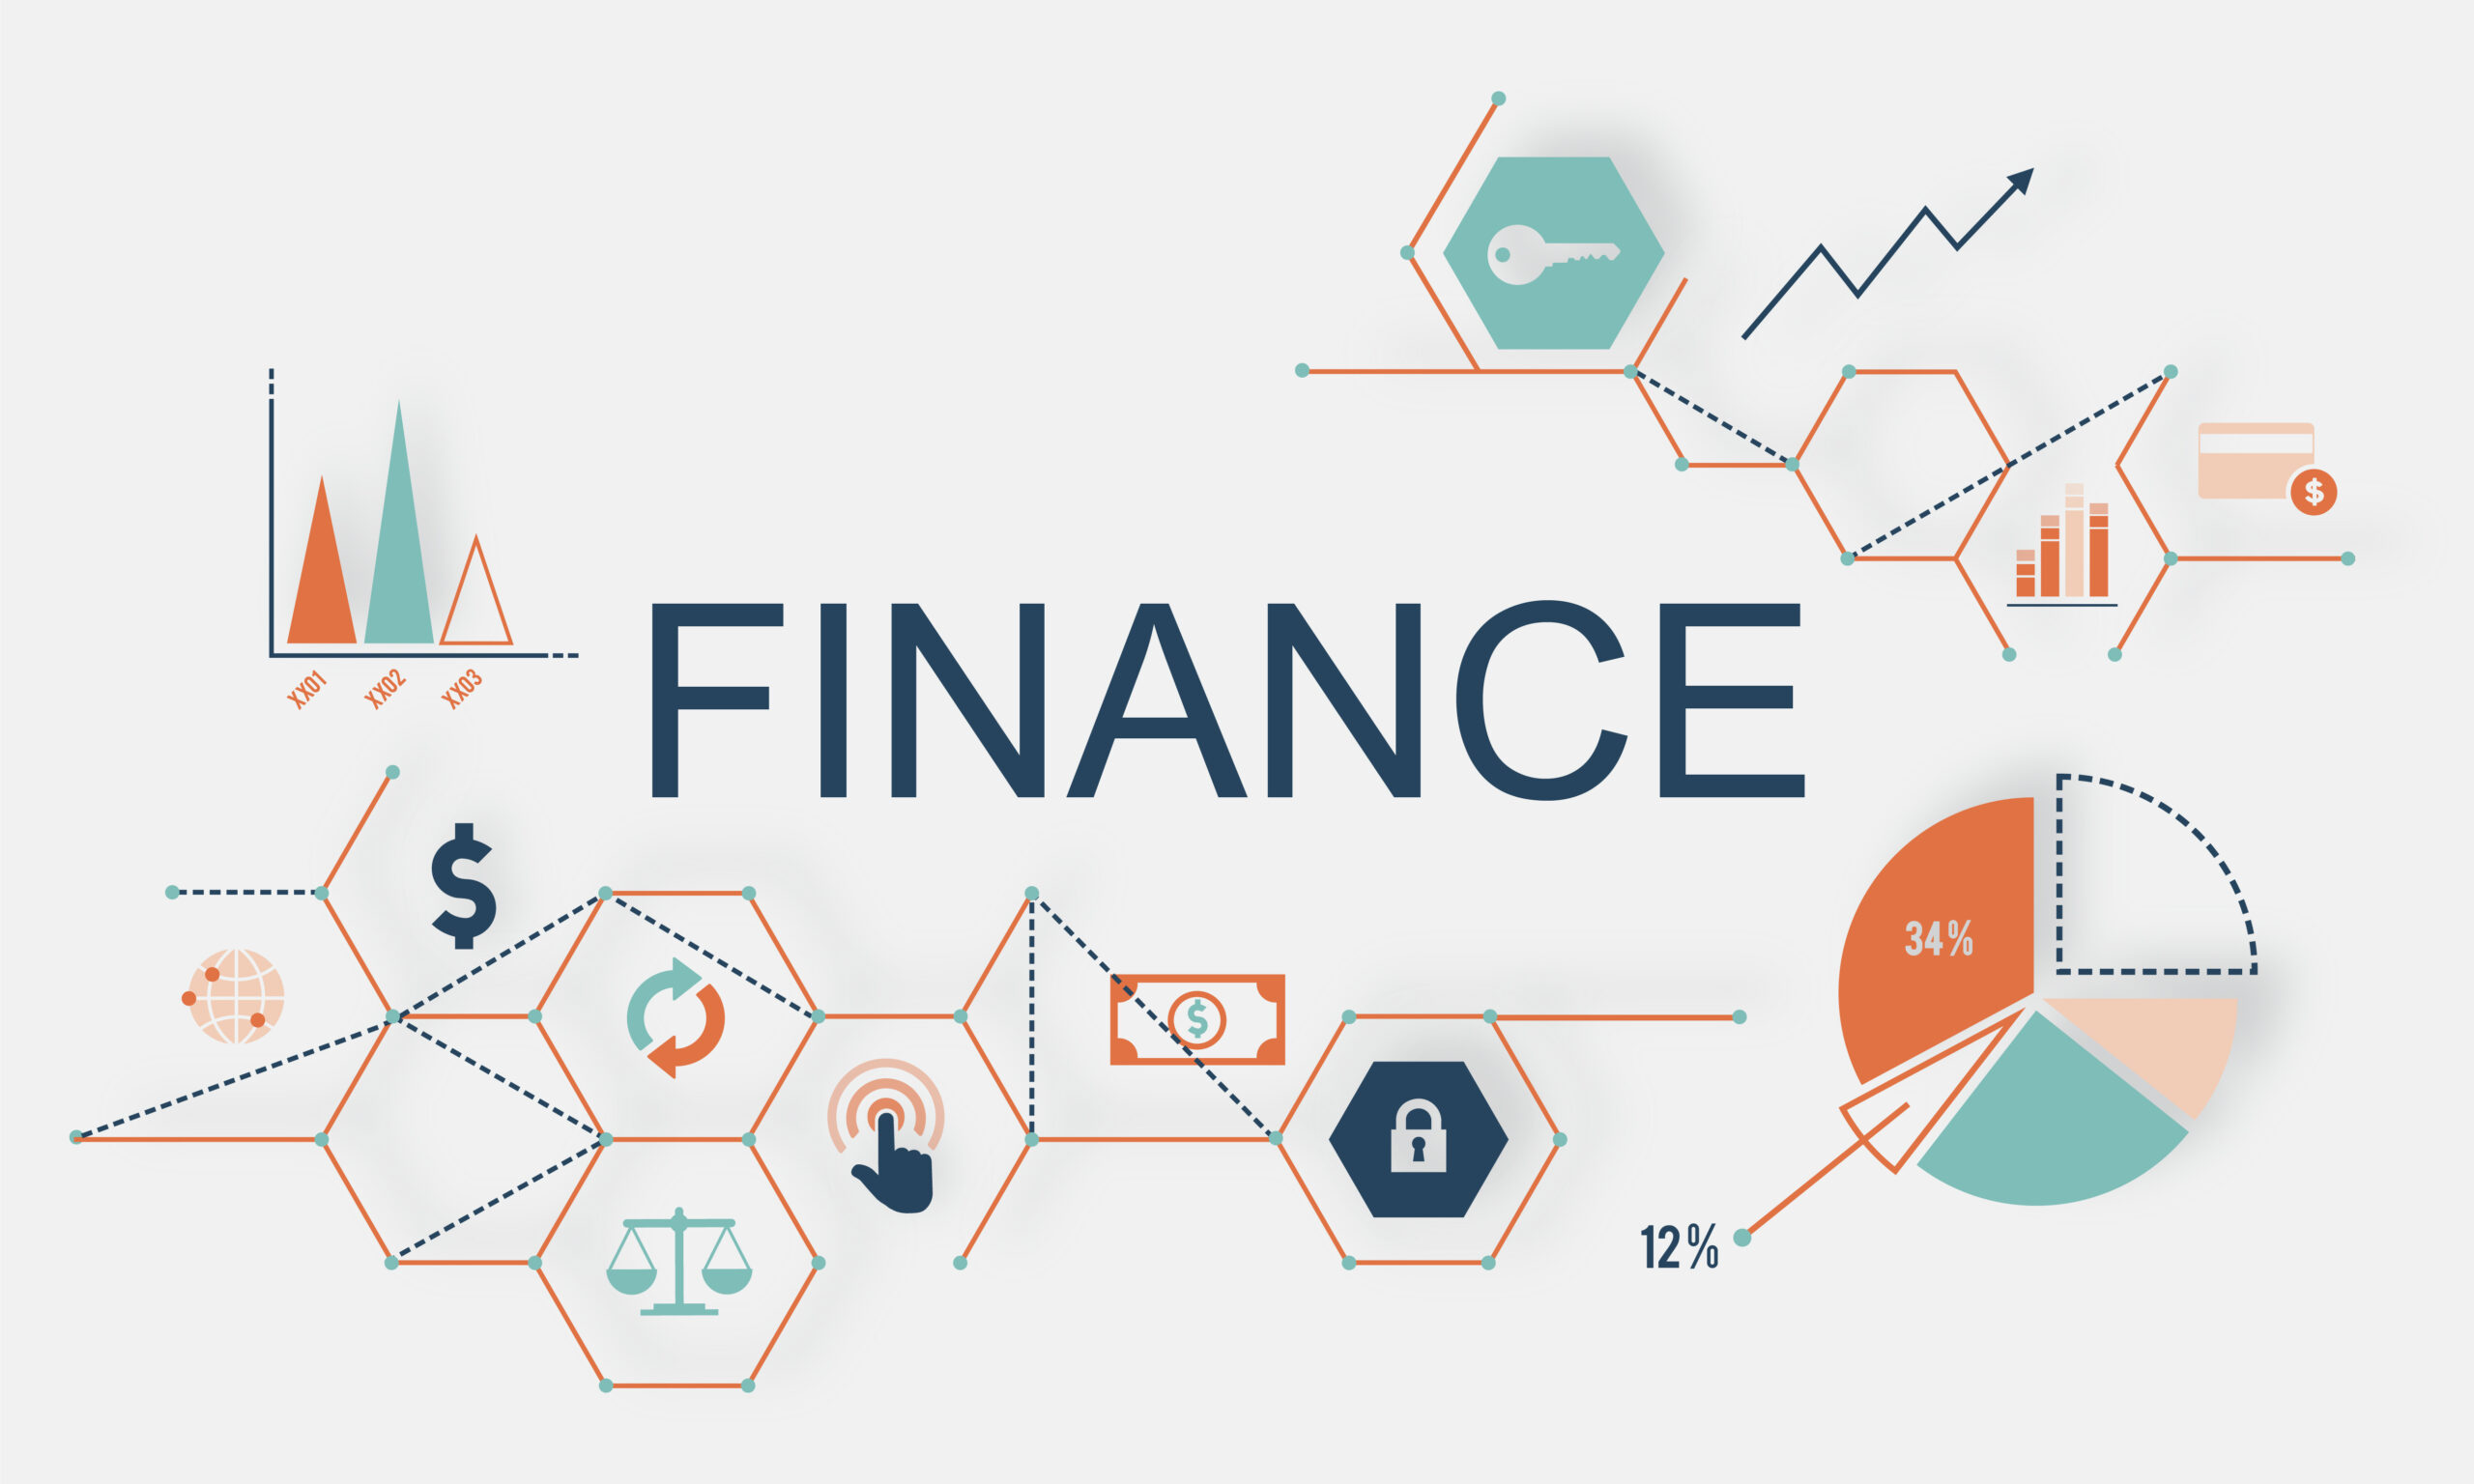 Applications of Data Science in Finance